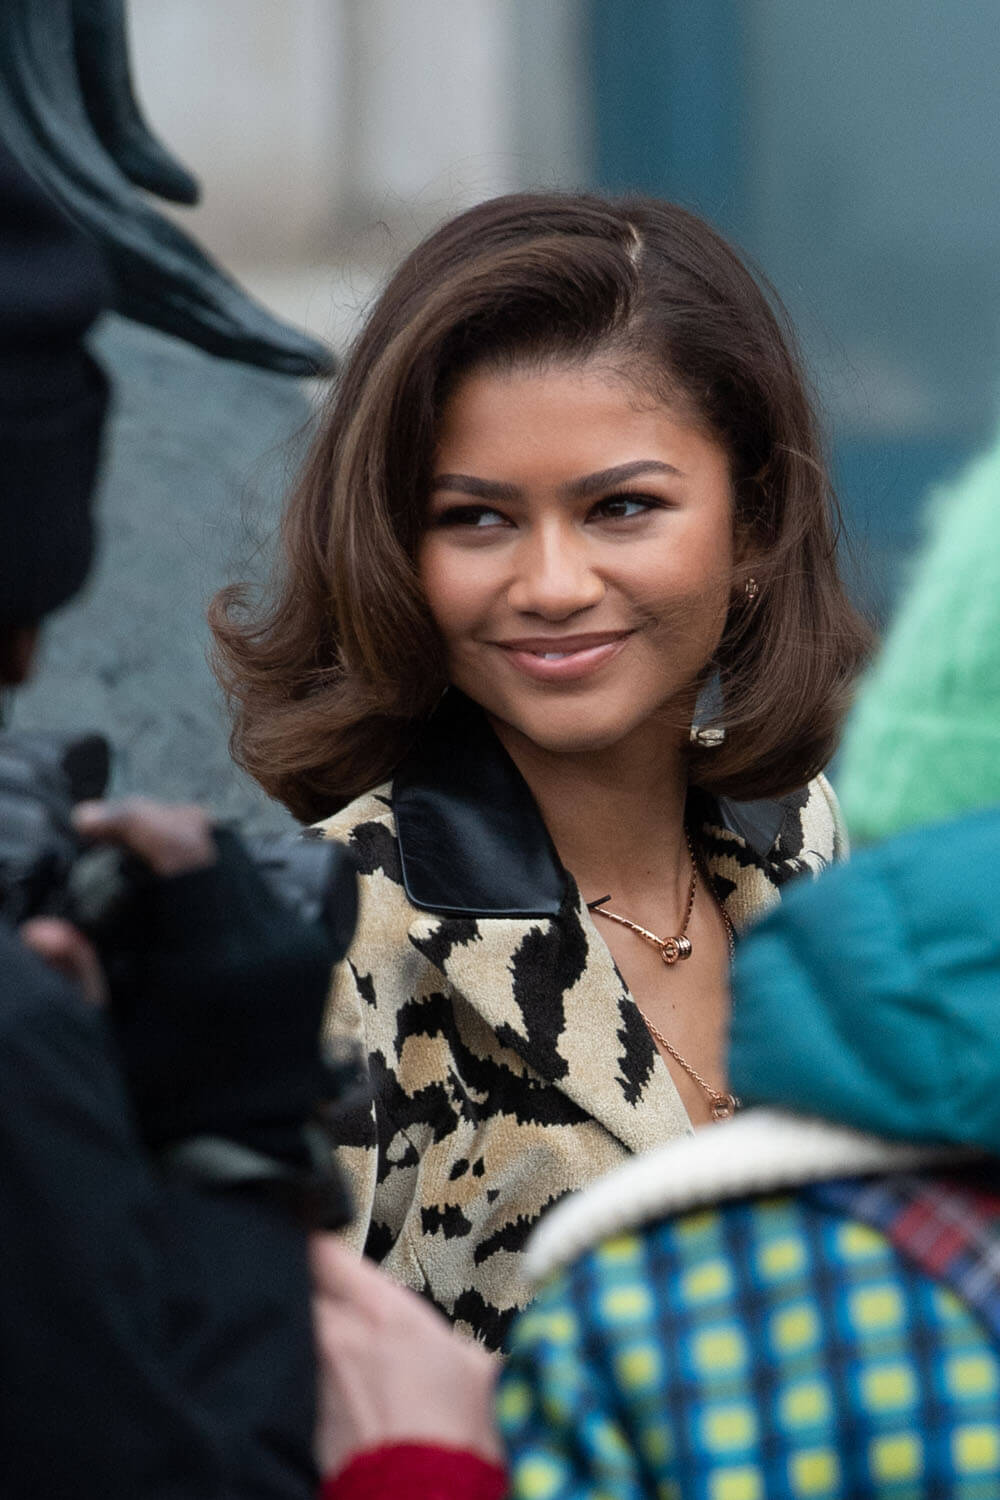 Social media is convinced that Zendaya's presence at Louis Vuitton in Paris  is the first sign there will be a partnership